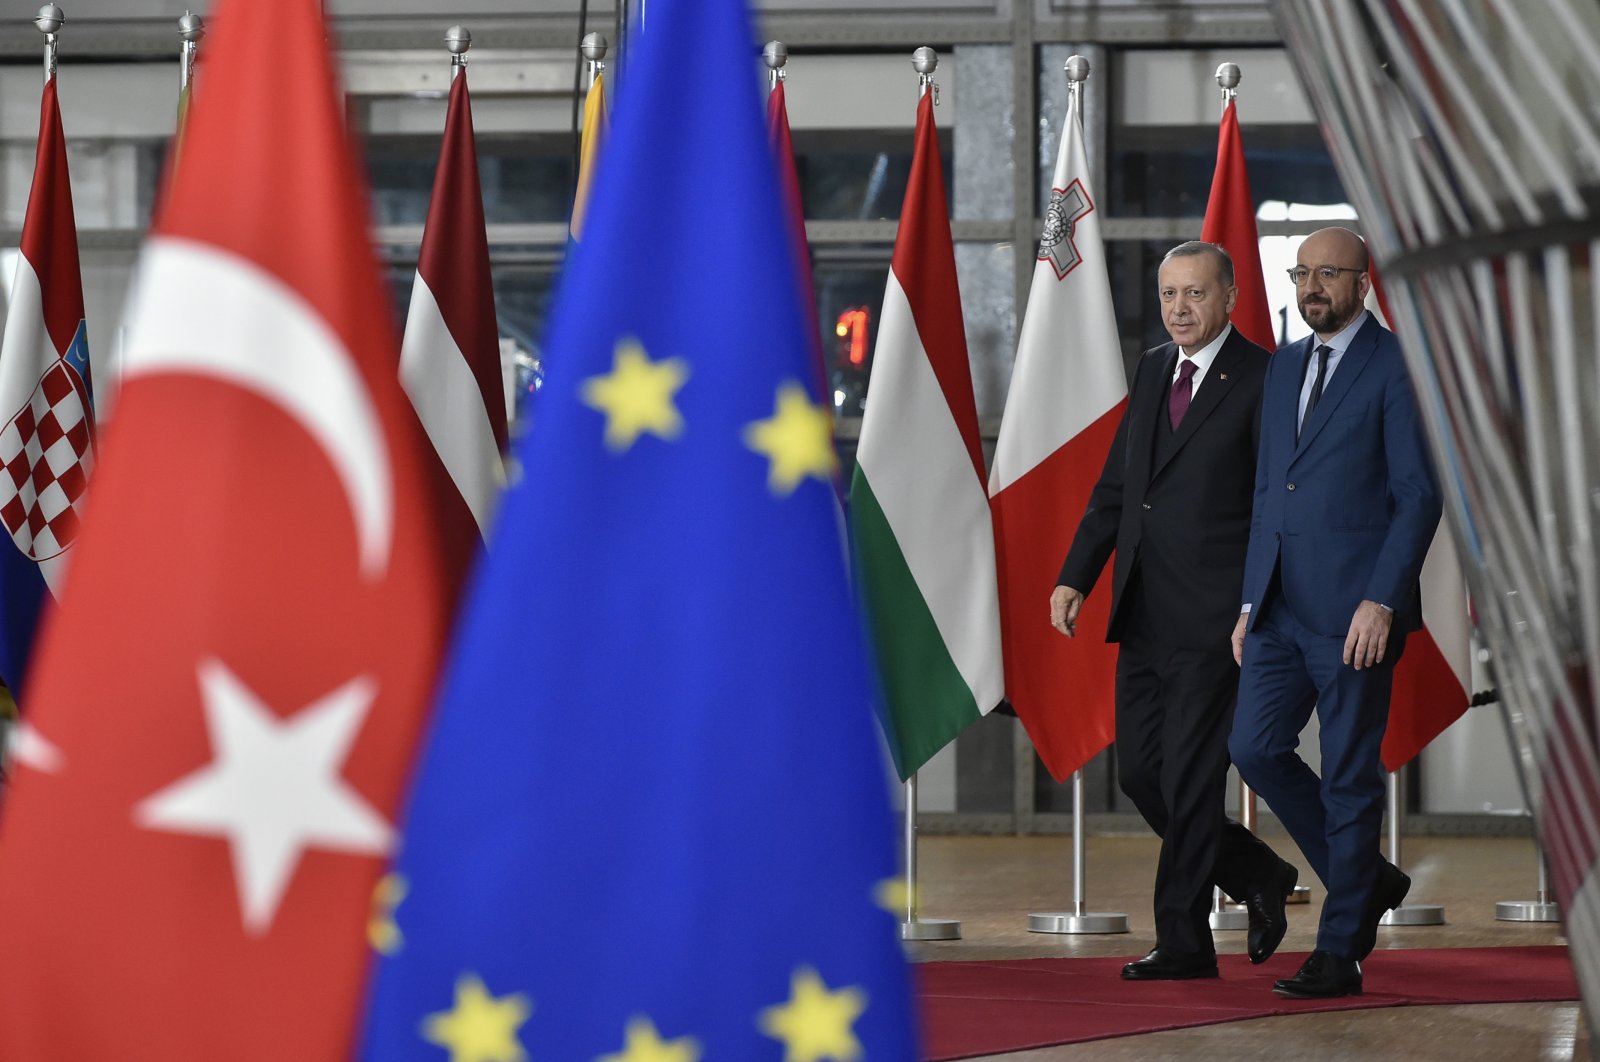 President Recep Tayyip Erdoğan walks with European Council President Charles Michel as he arrives at the European Council building in Brussels, Monday, March 9, 2020. (AP File Photo)